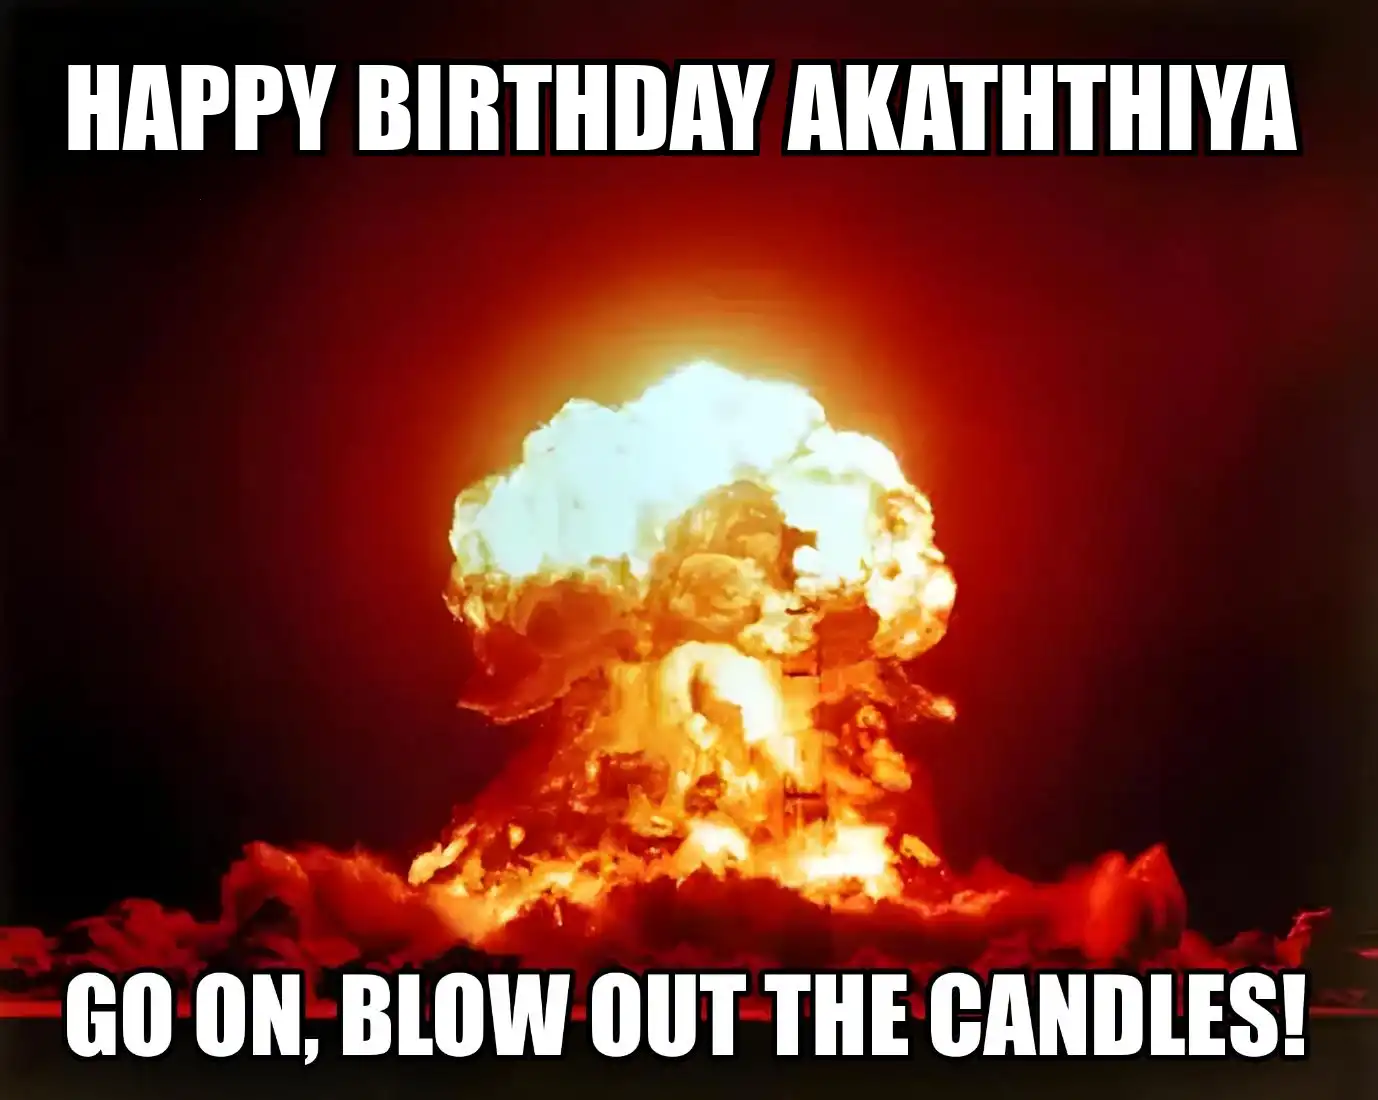 Happy Birthday Akaththiya Go On Blow Out The Candles Meme